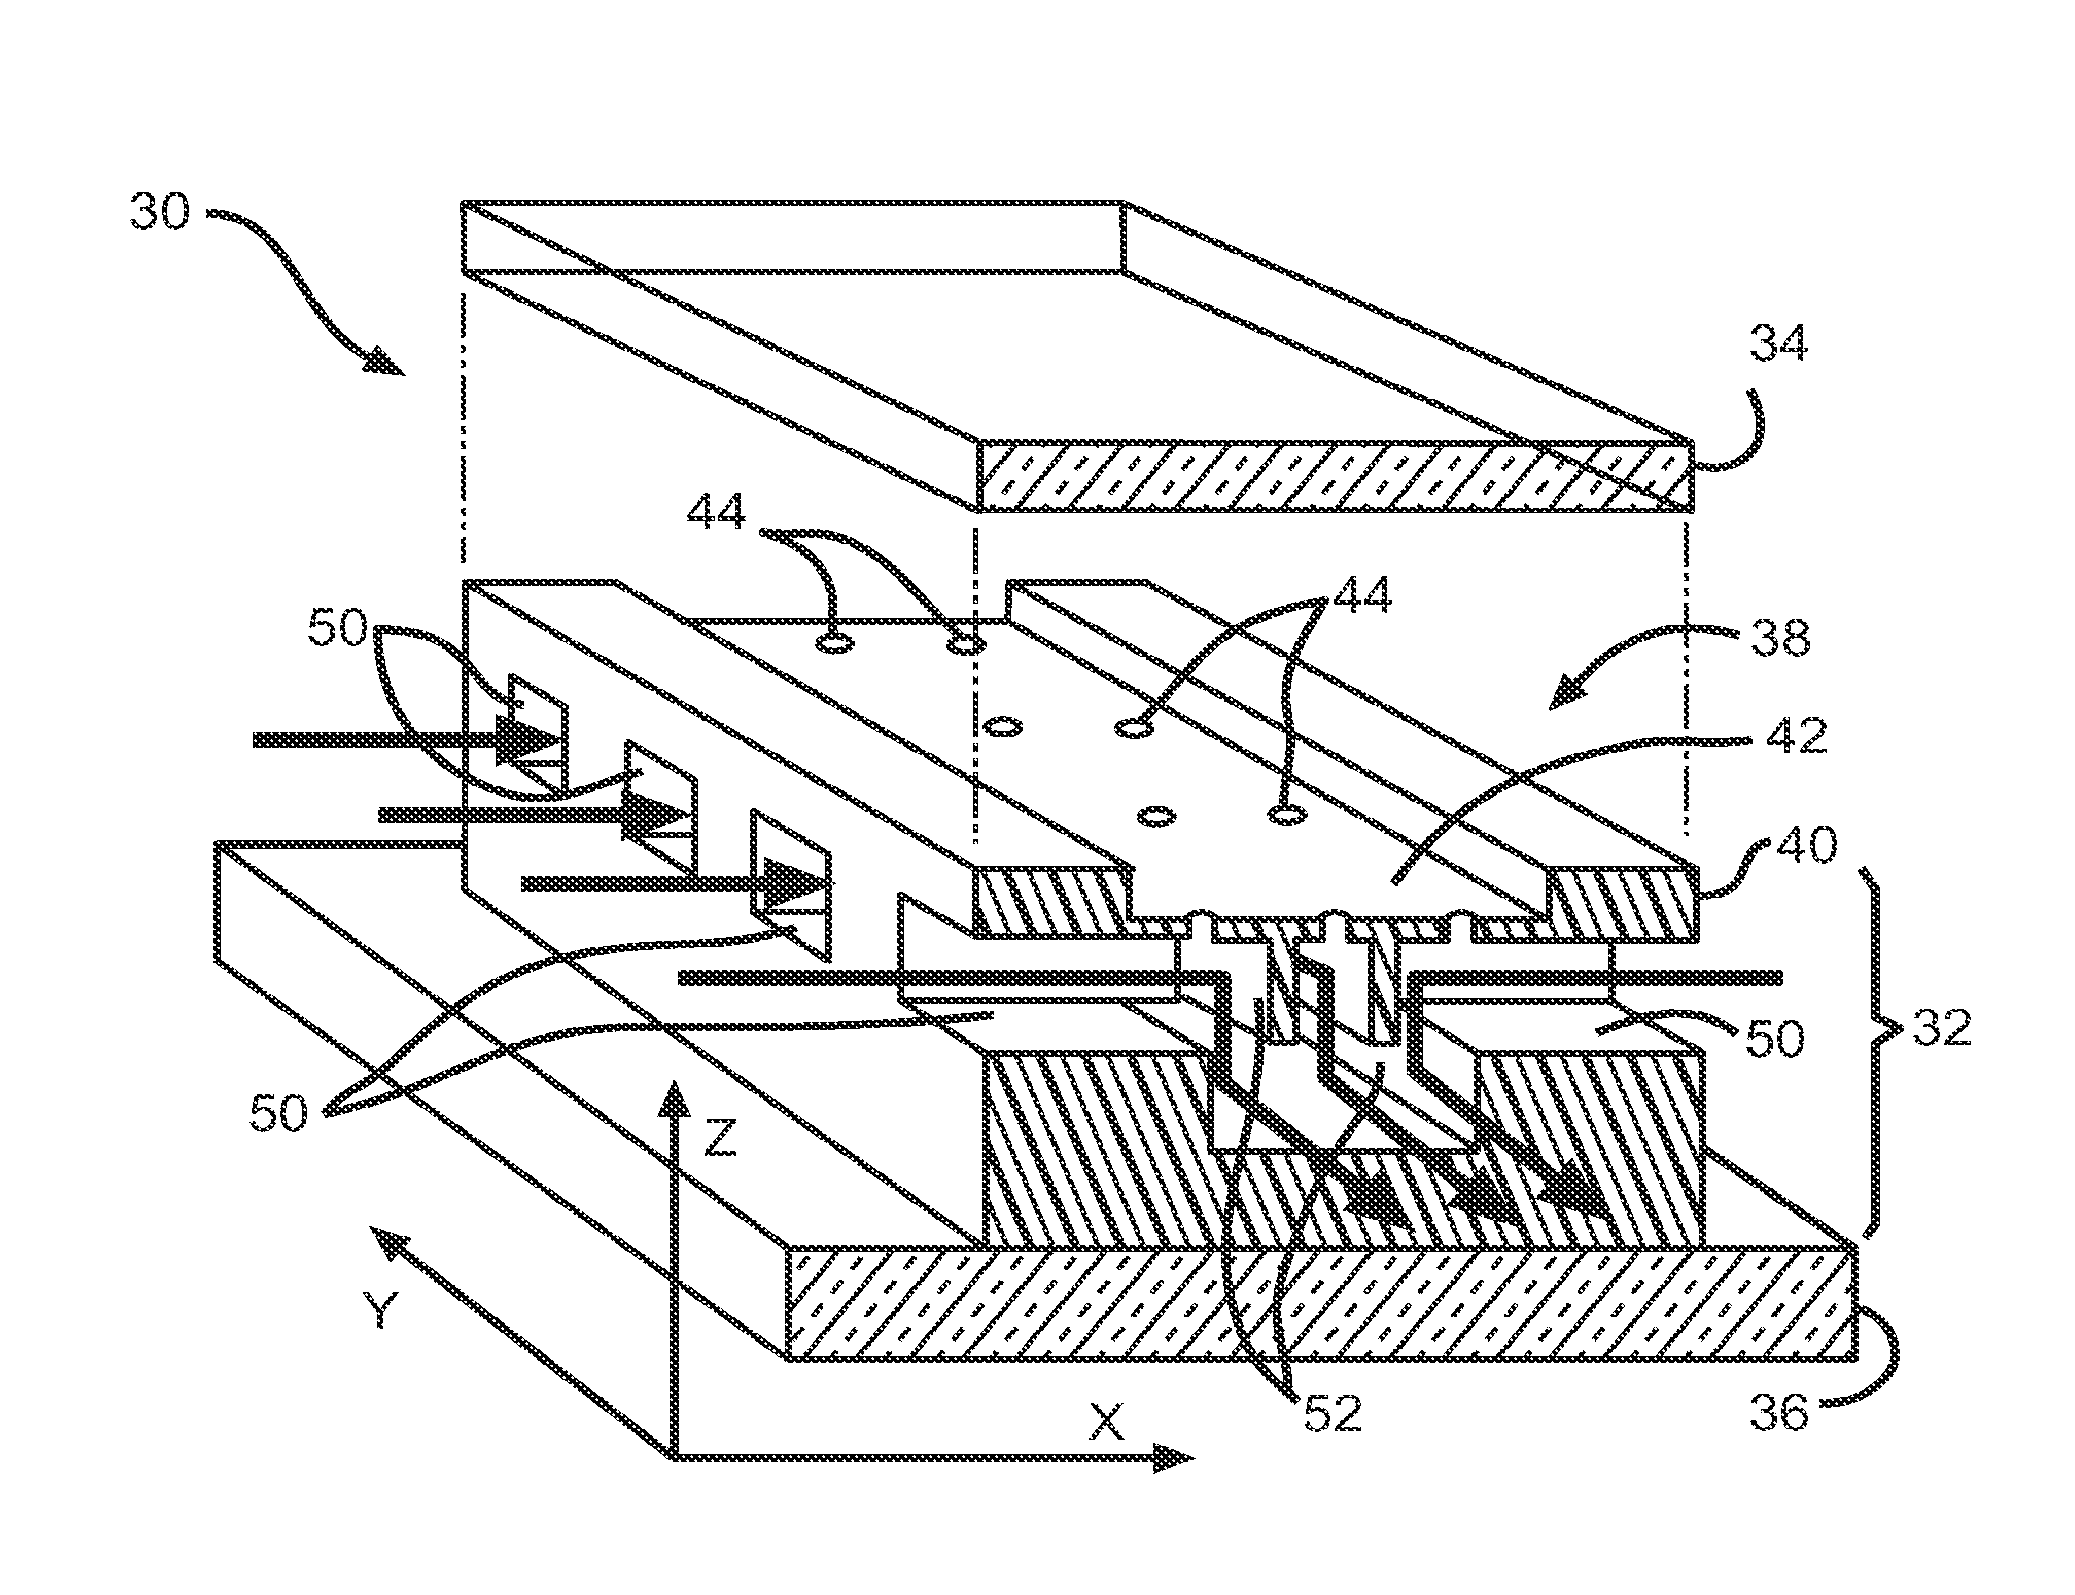 Microfluidic device and related methods